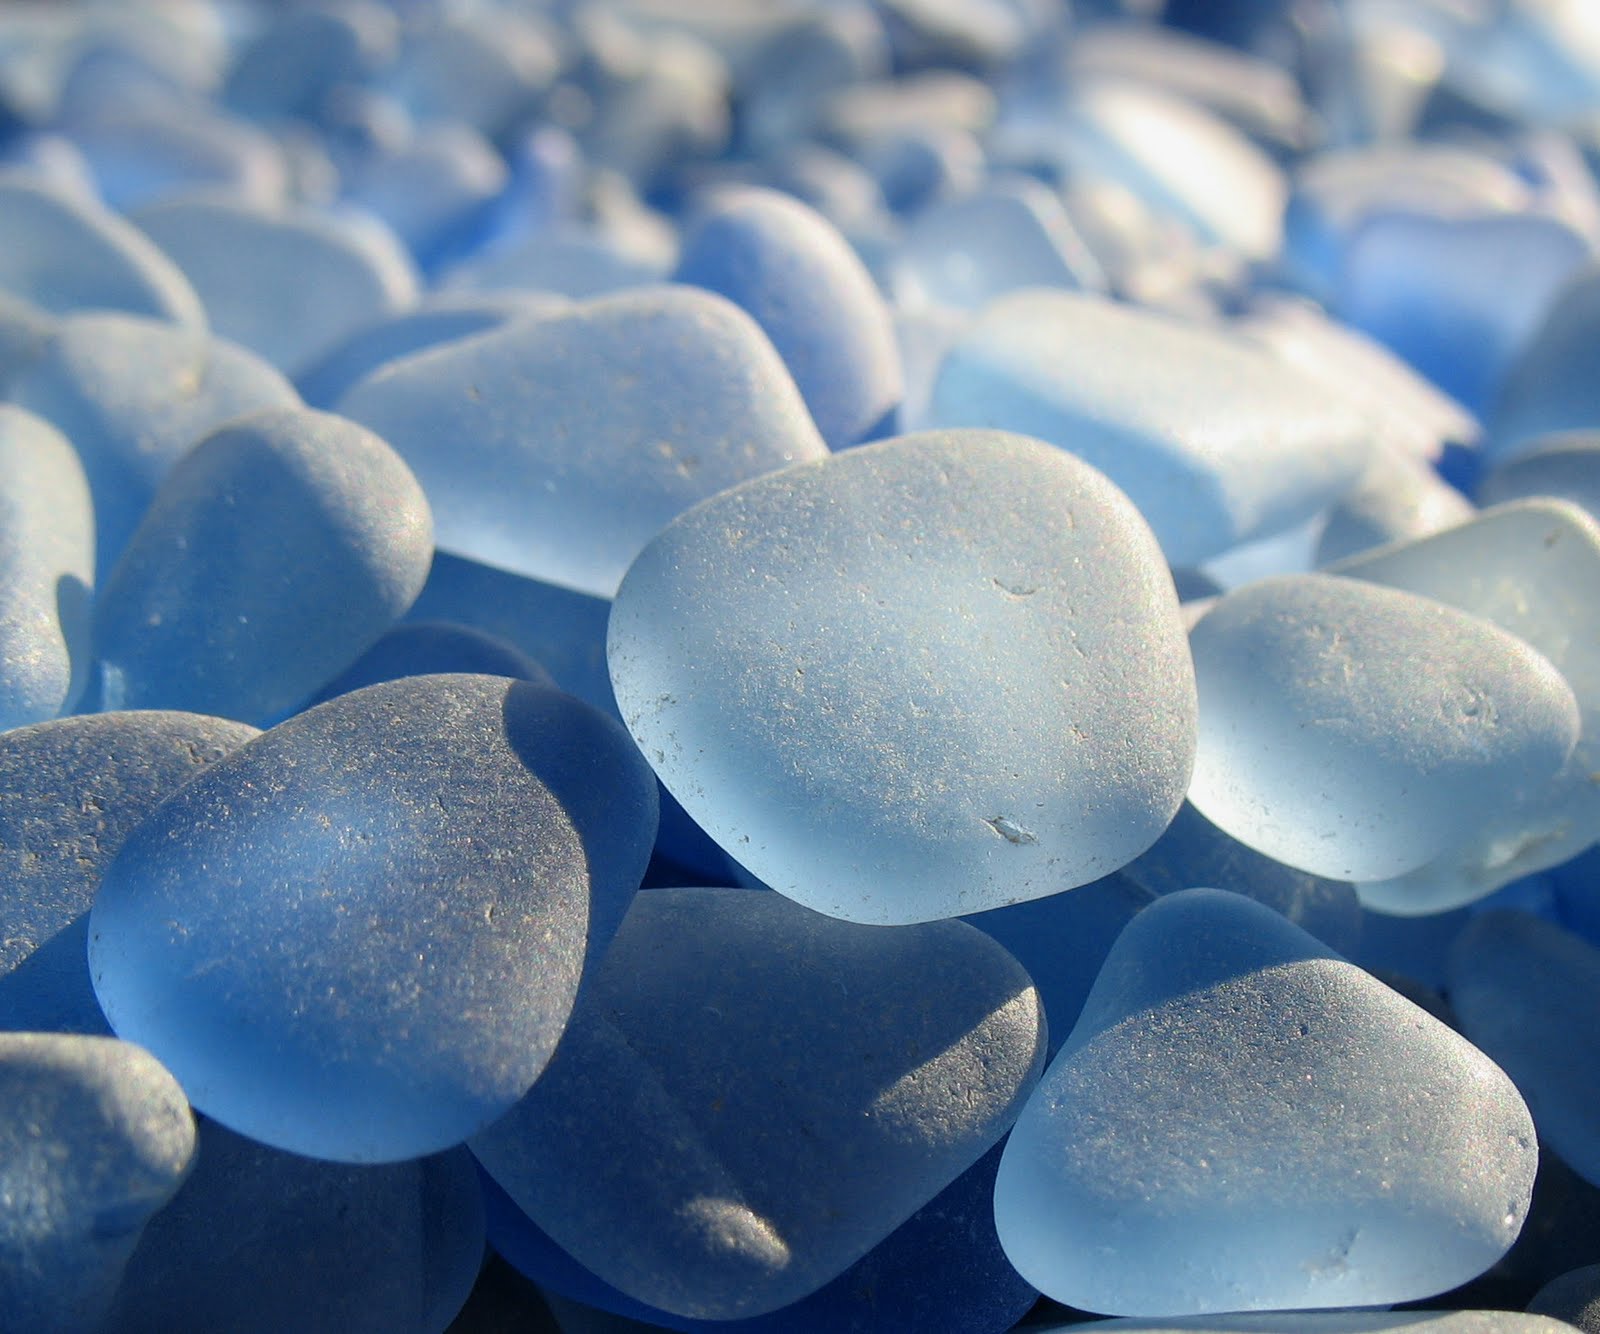 Sea Glass - What's it all about then!?